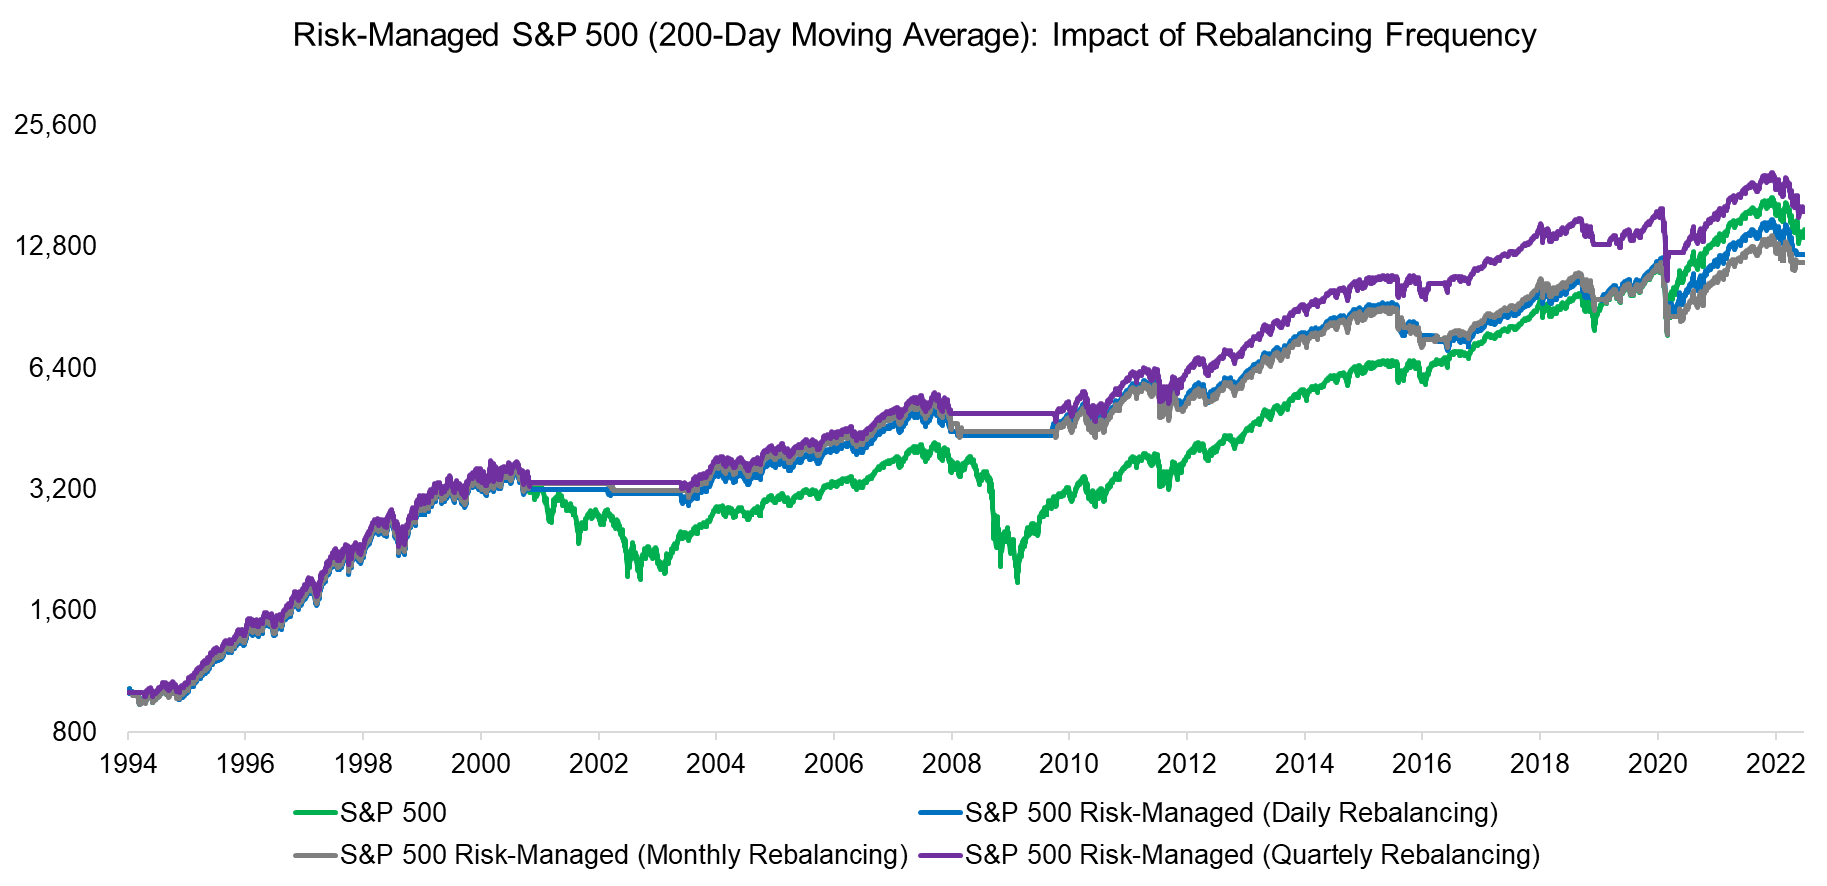 Risk-Managed S&P 500 (200-Day Moving Average) Impact of Rebalancing Frequency